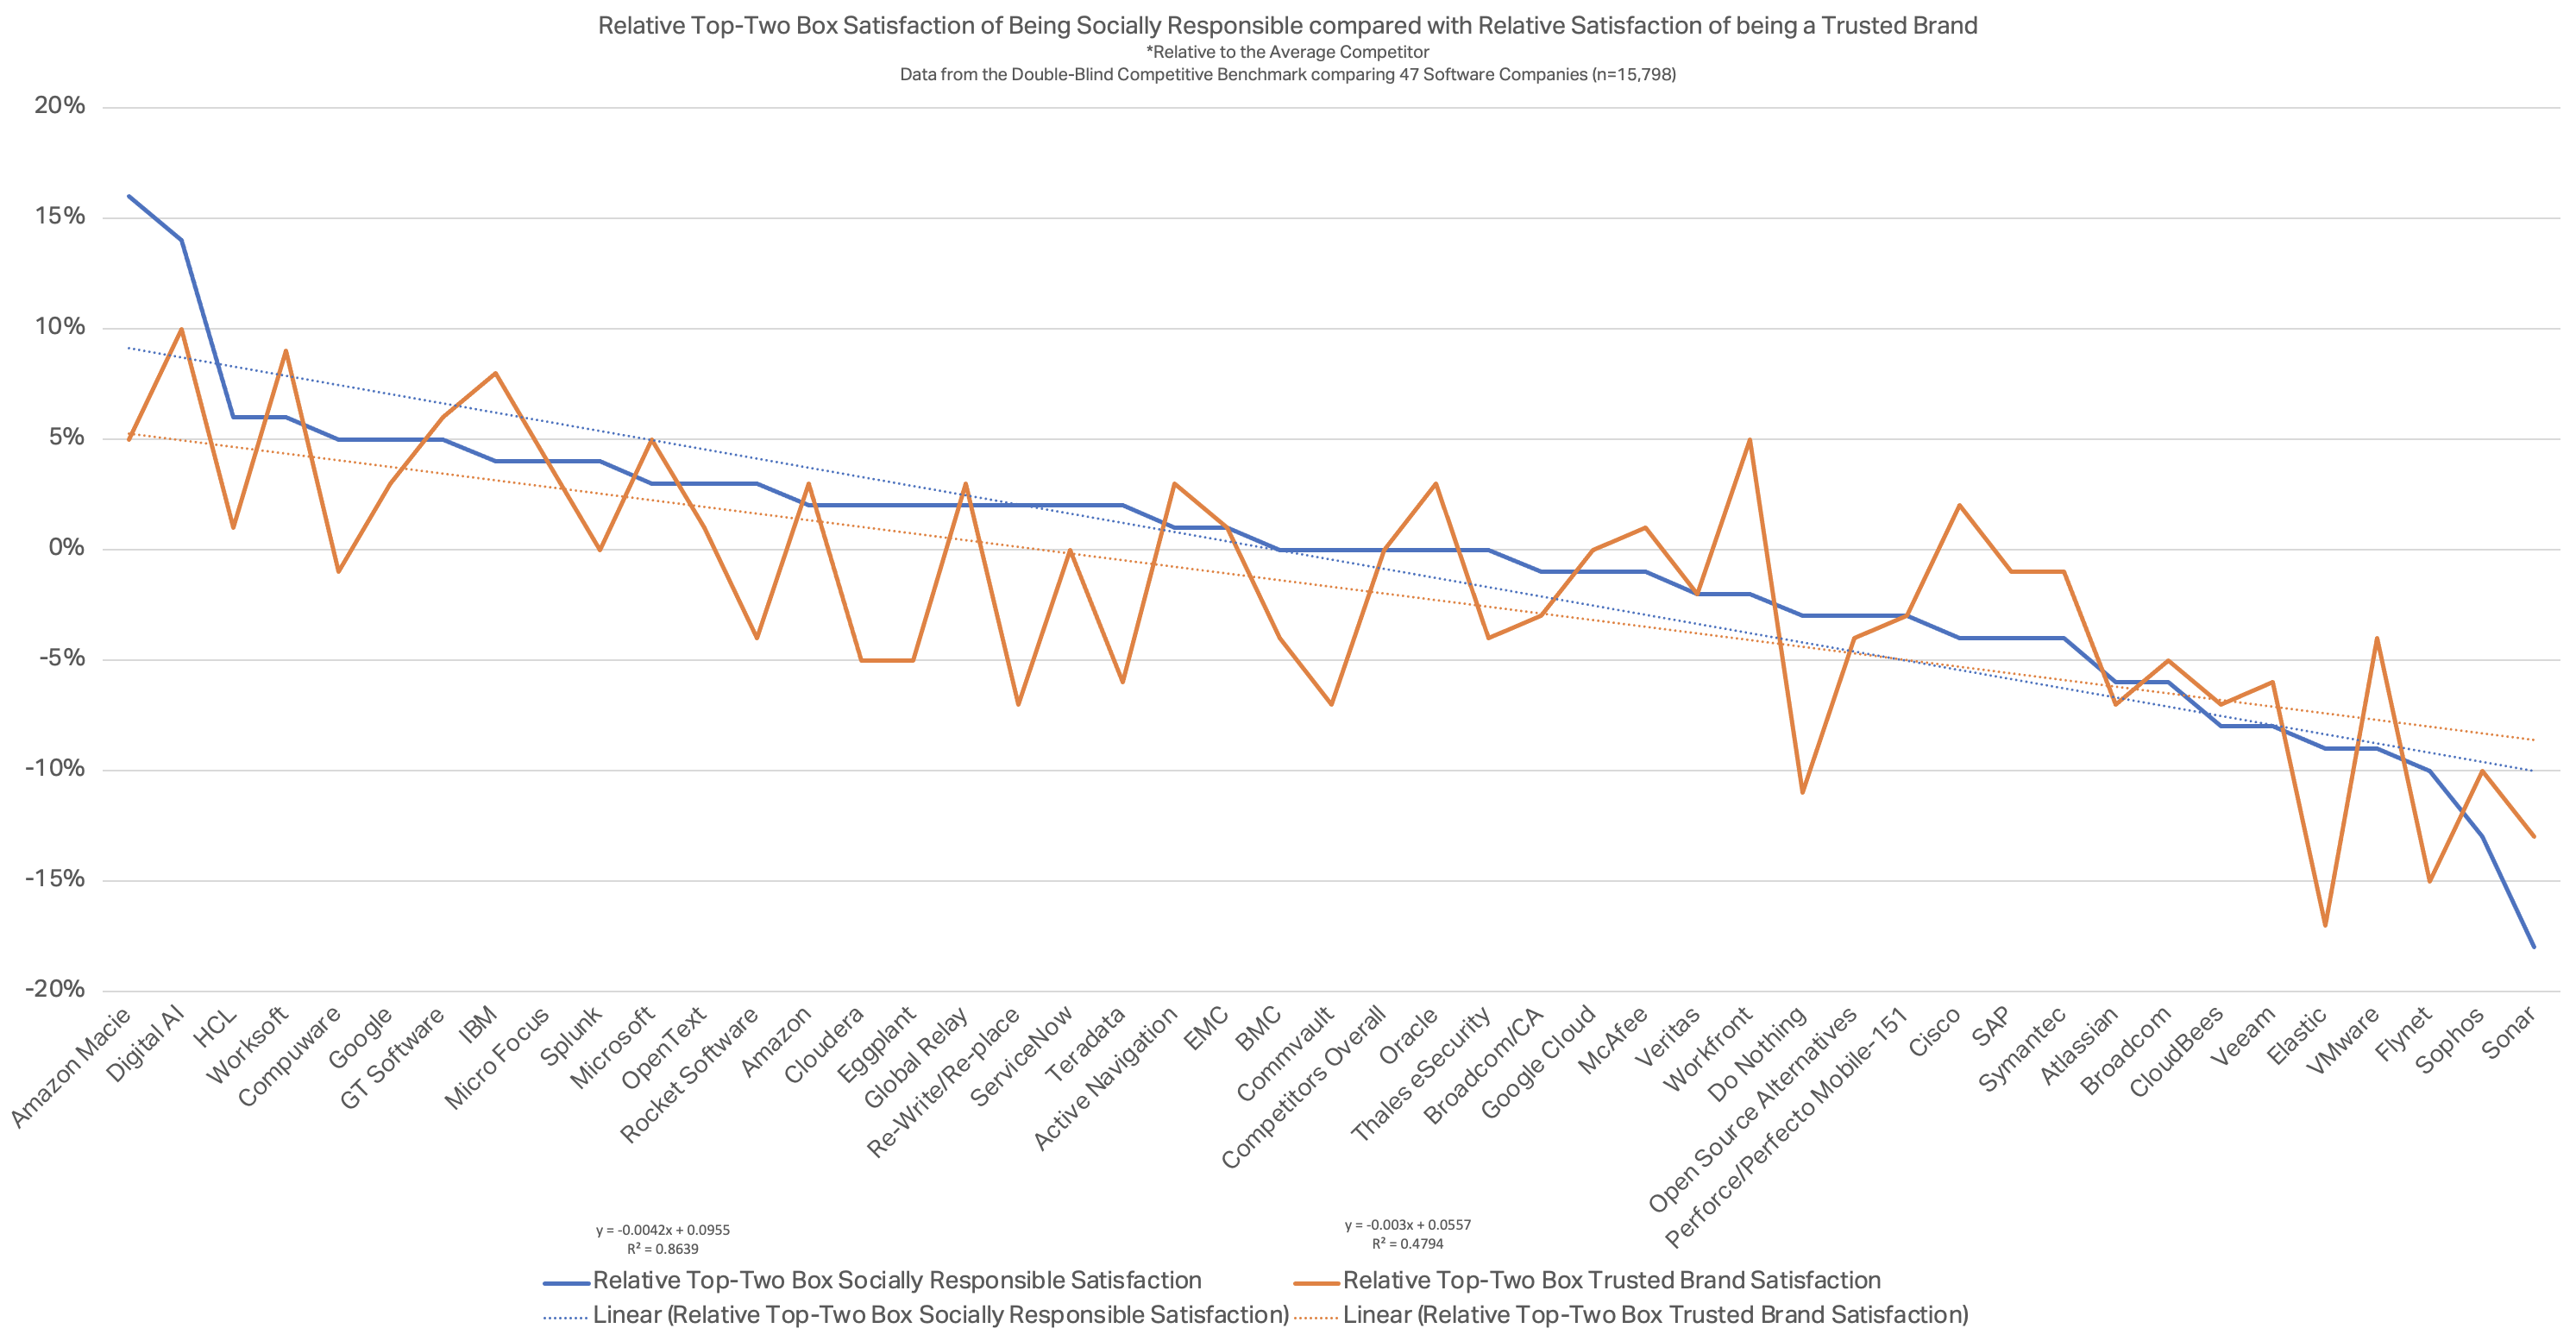 Top-Two Box Satisfaction comparing every brand within software for being socially responsible